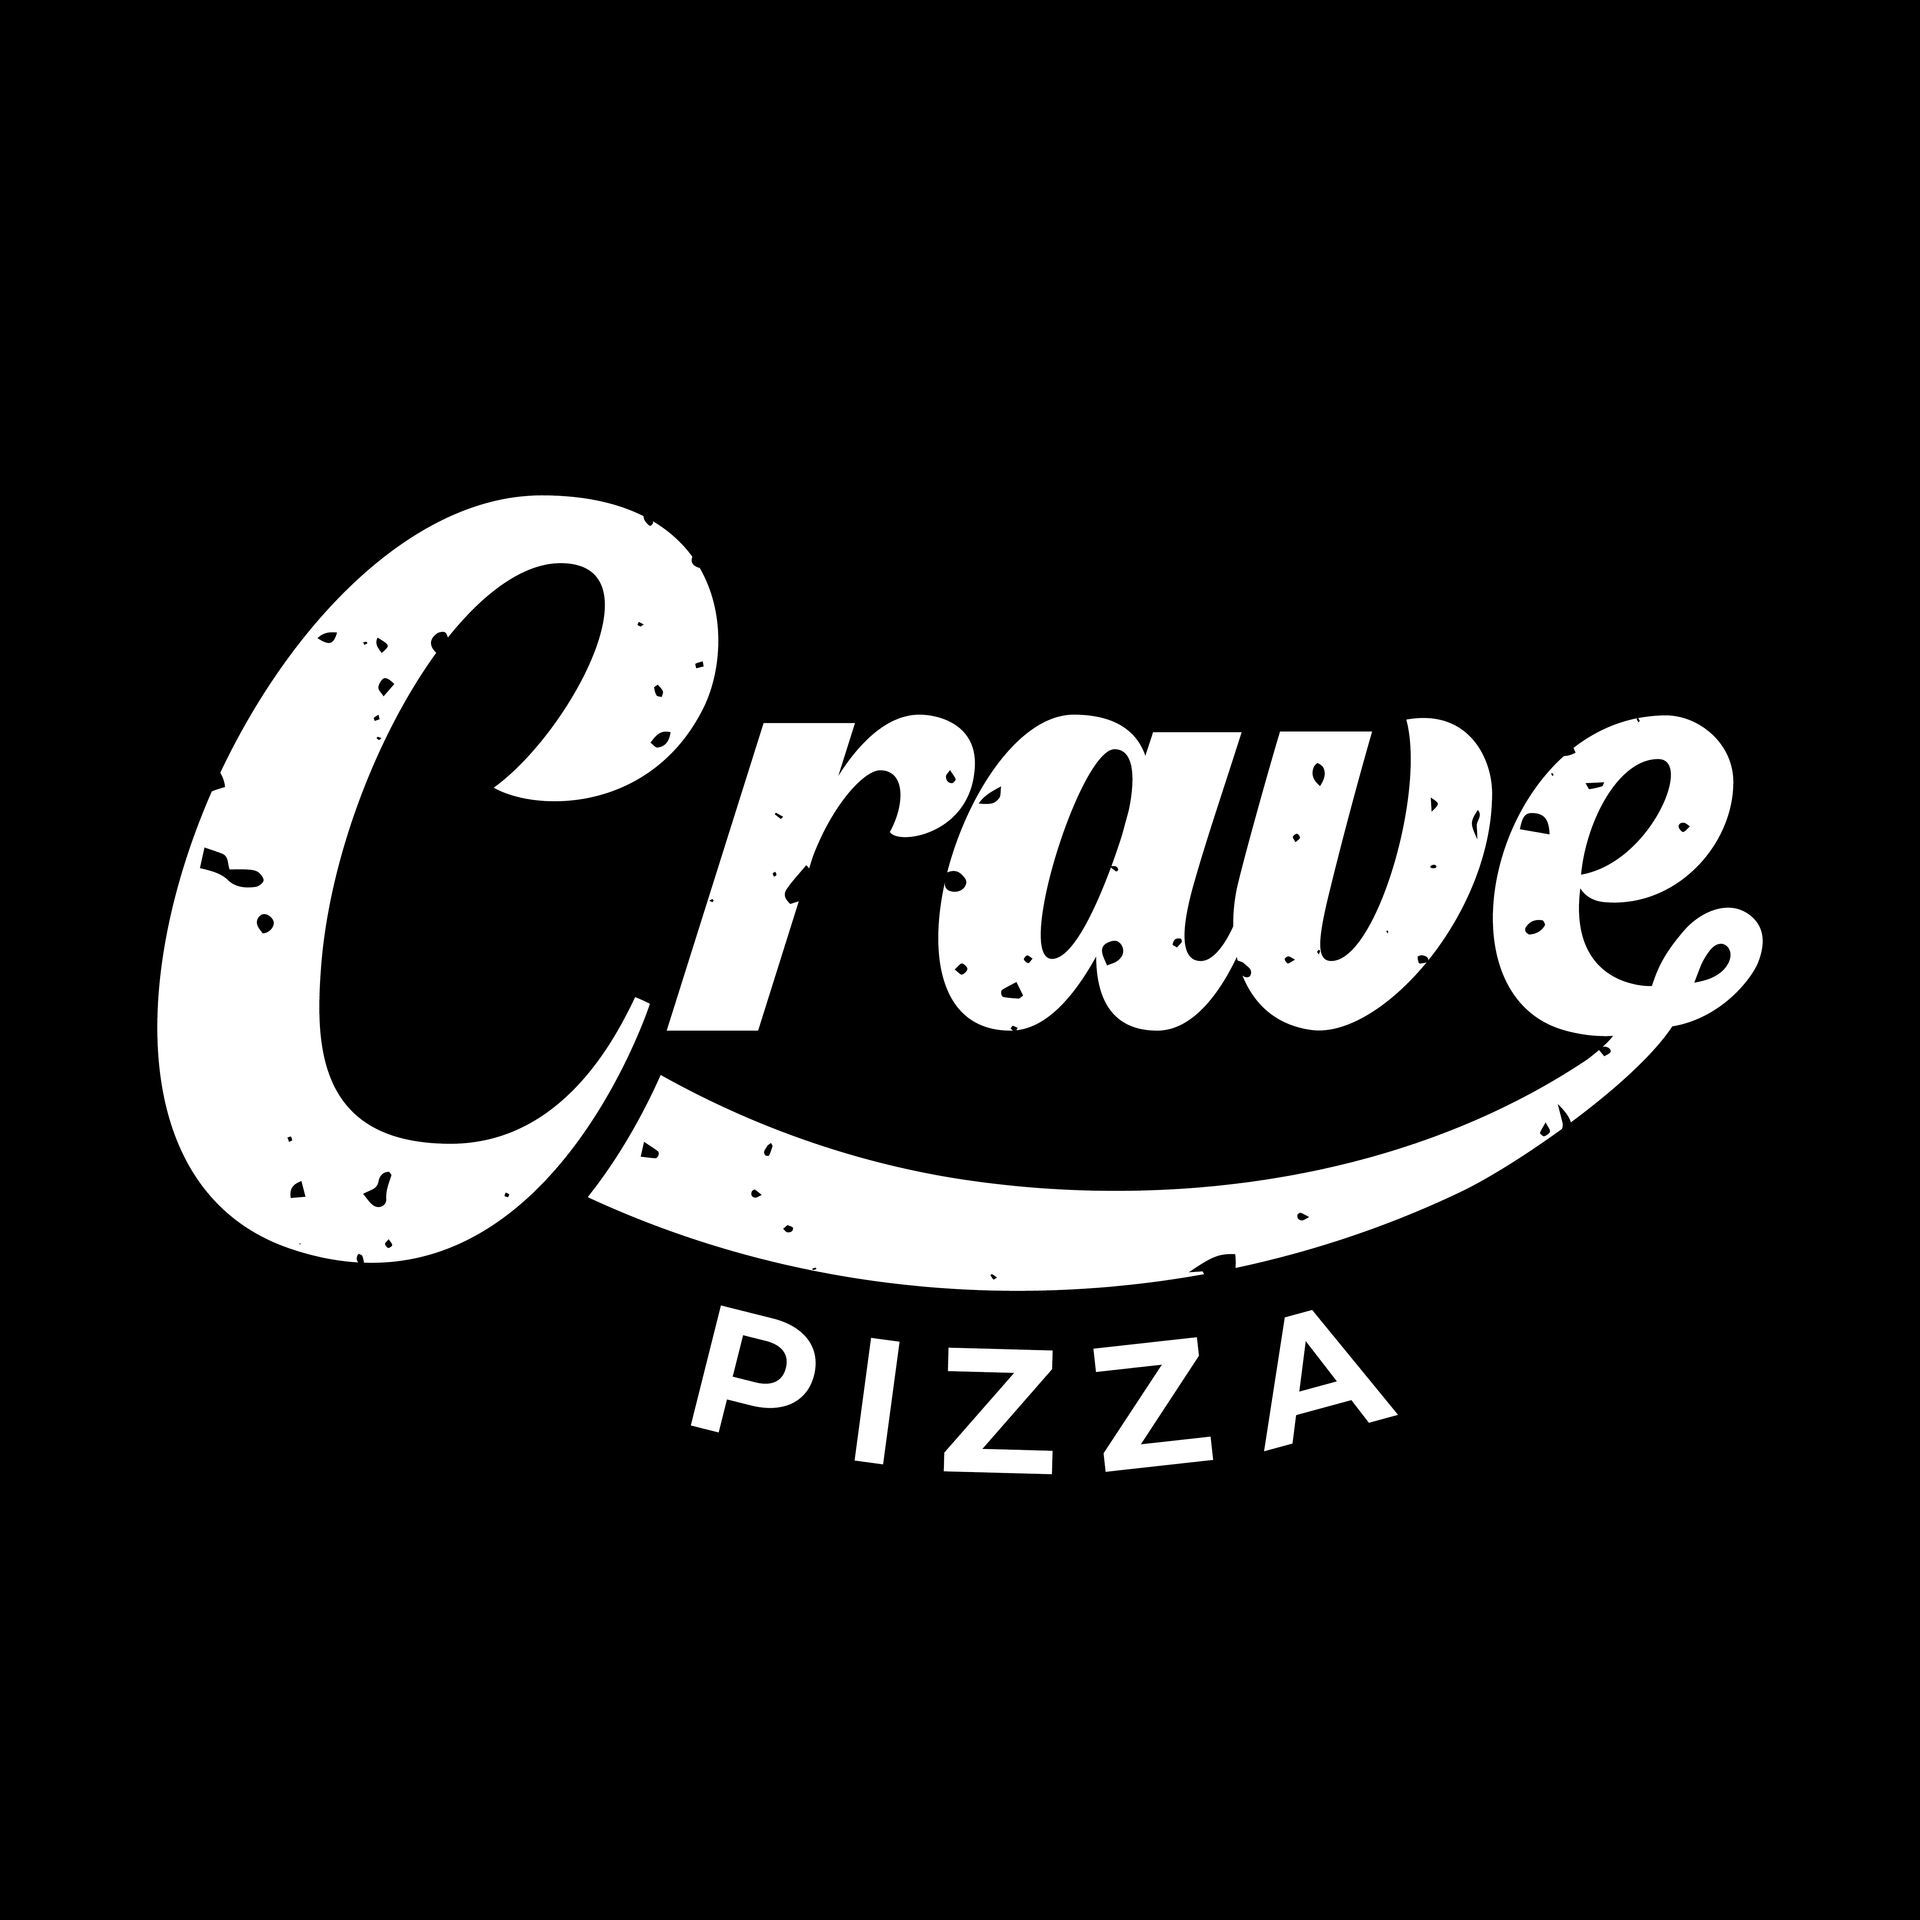 www.crave-pizza.co.uk